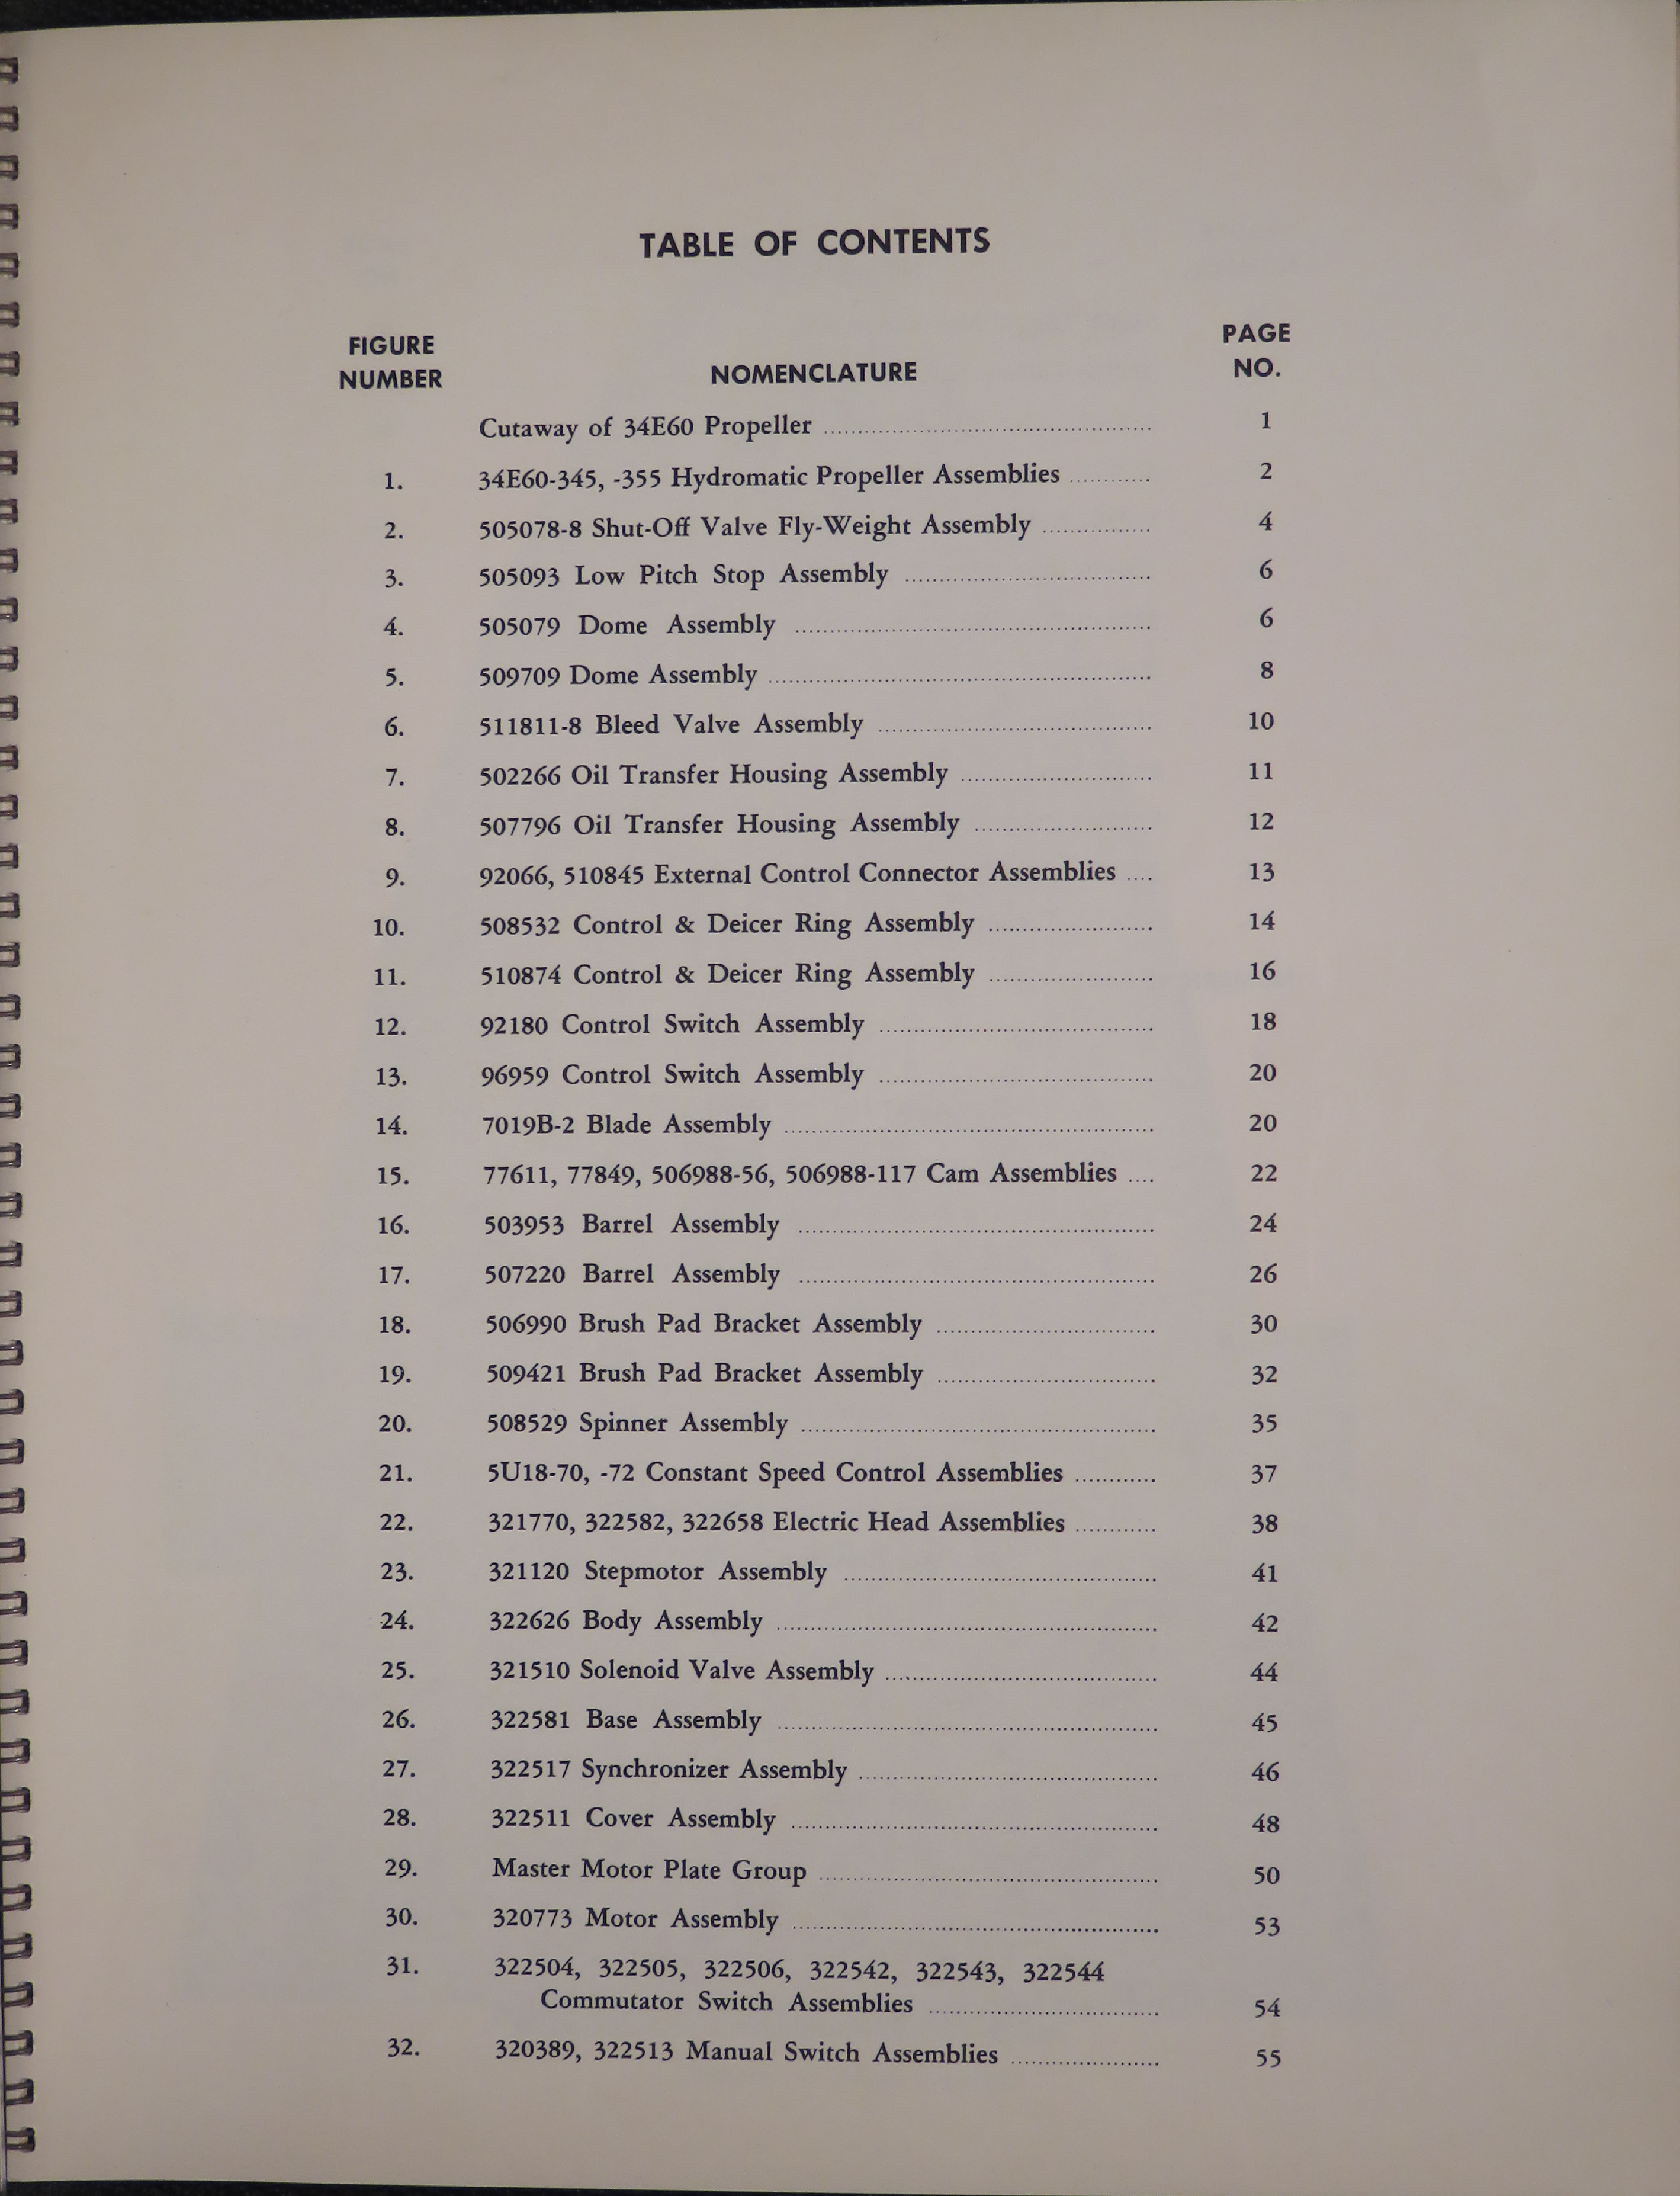 Sample page 5 from AirCorps Library document: Parts Catalog for Hydromatic Propeller Models 34E60 for Douglas DC7-C 